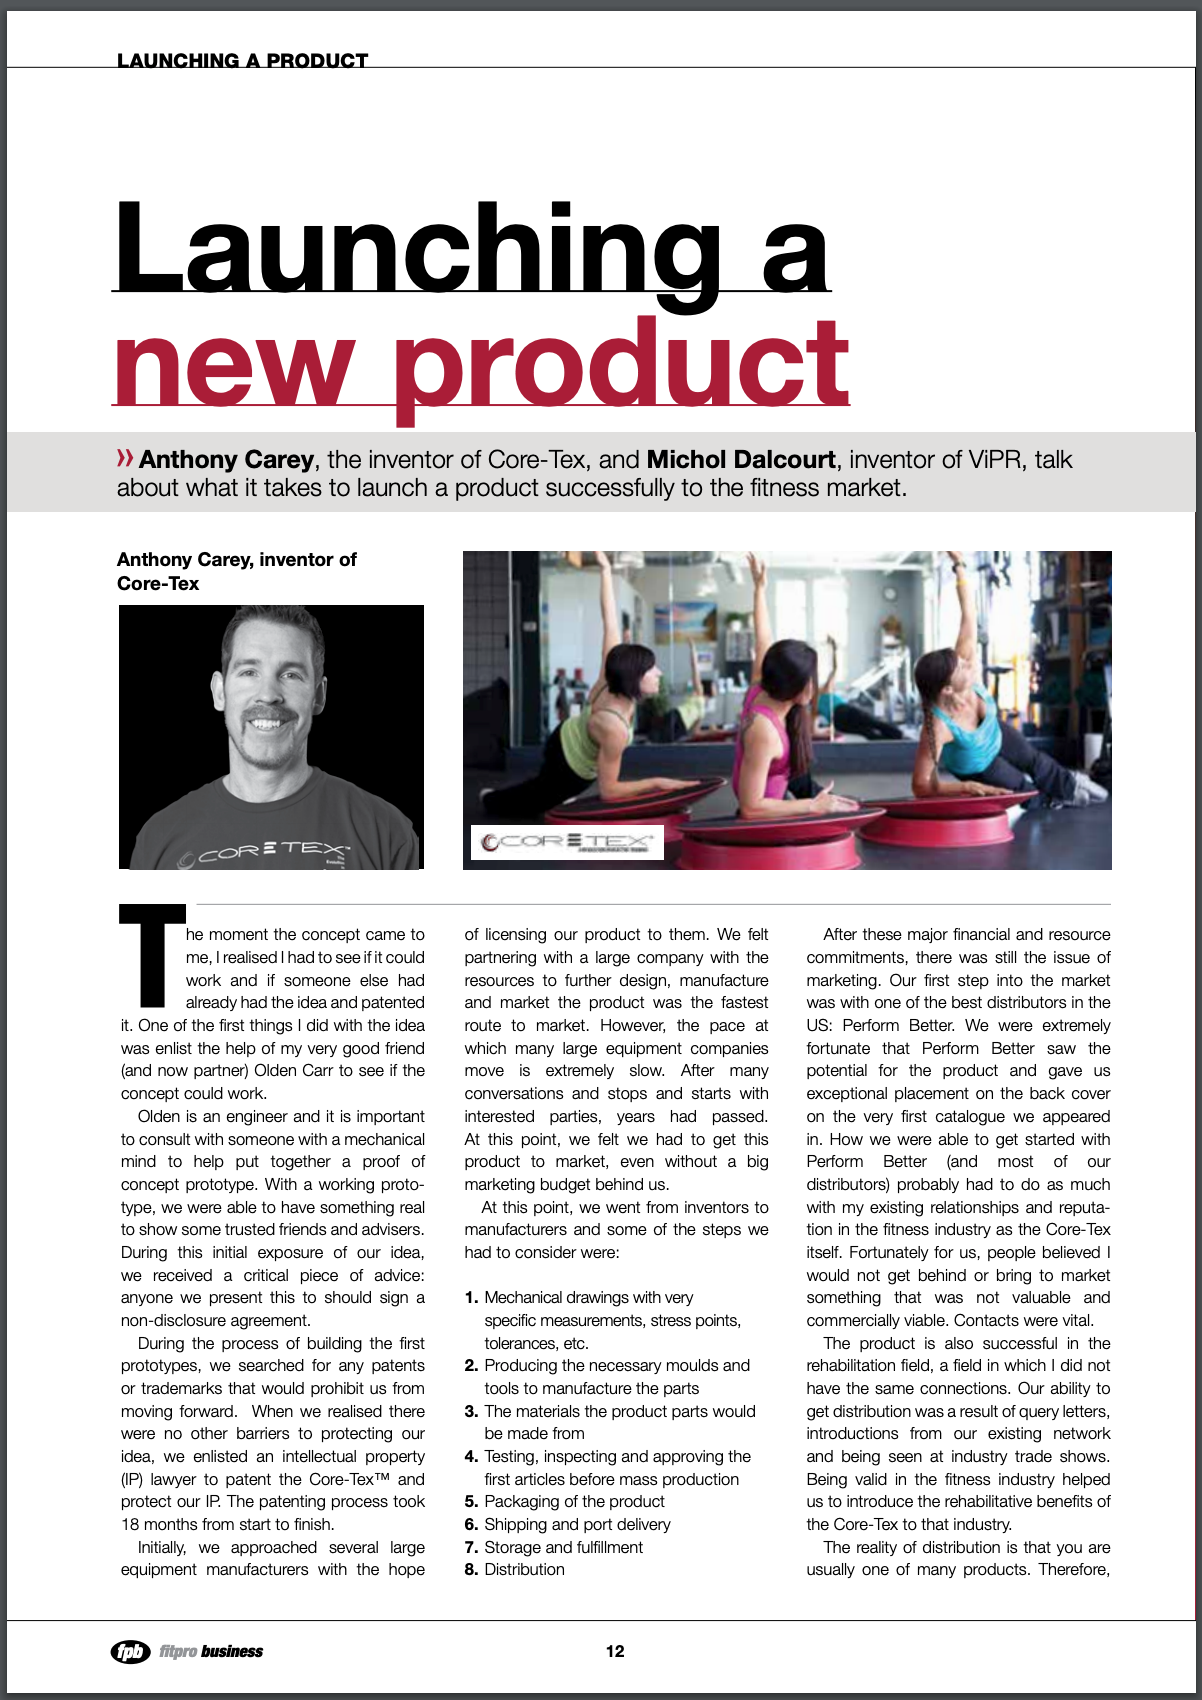 FITPRO BUSINESS MAGAZINE, SPRING 2013: Launching a New Product